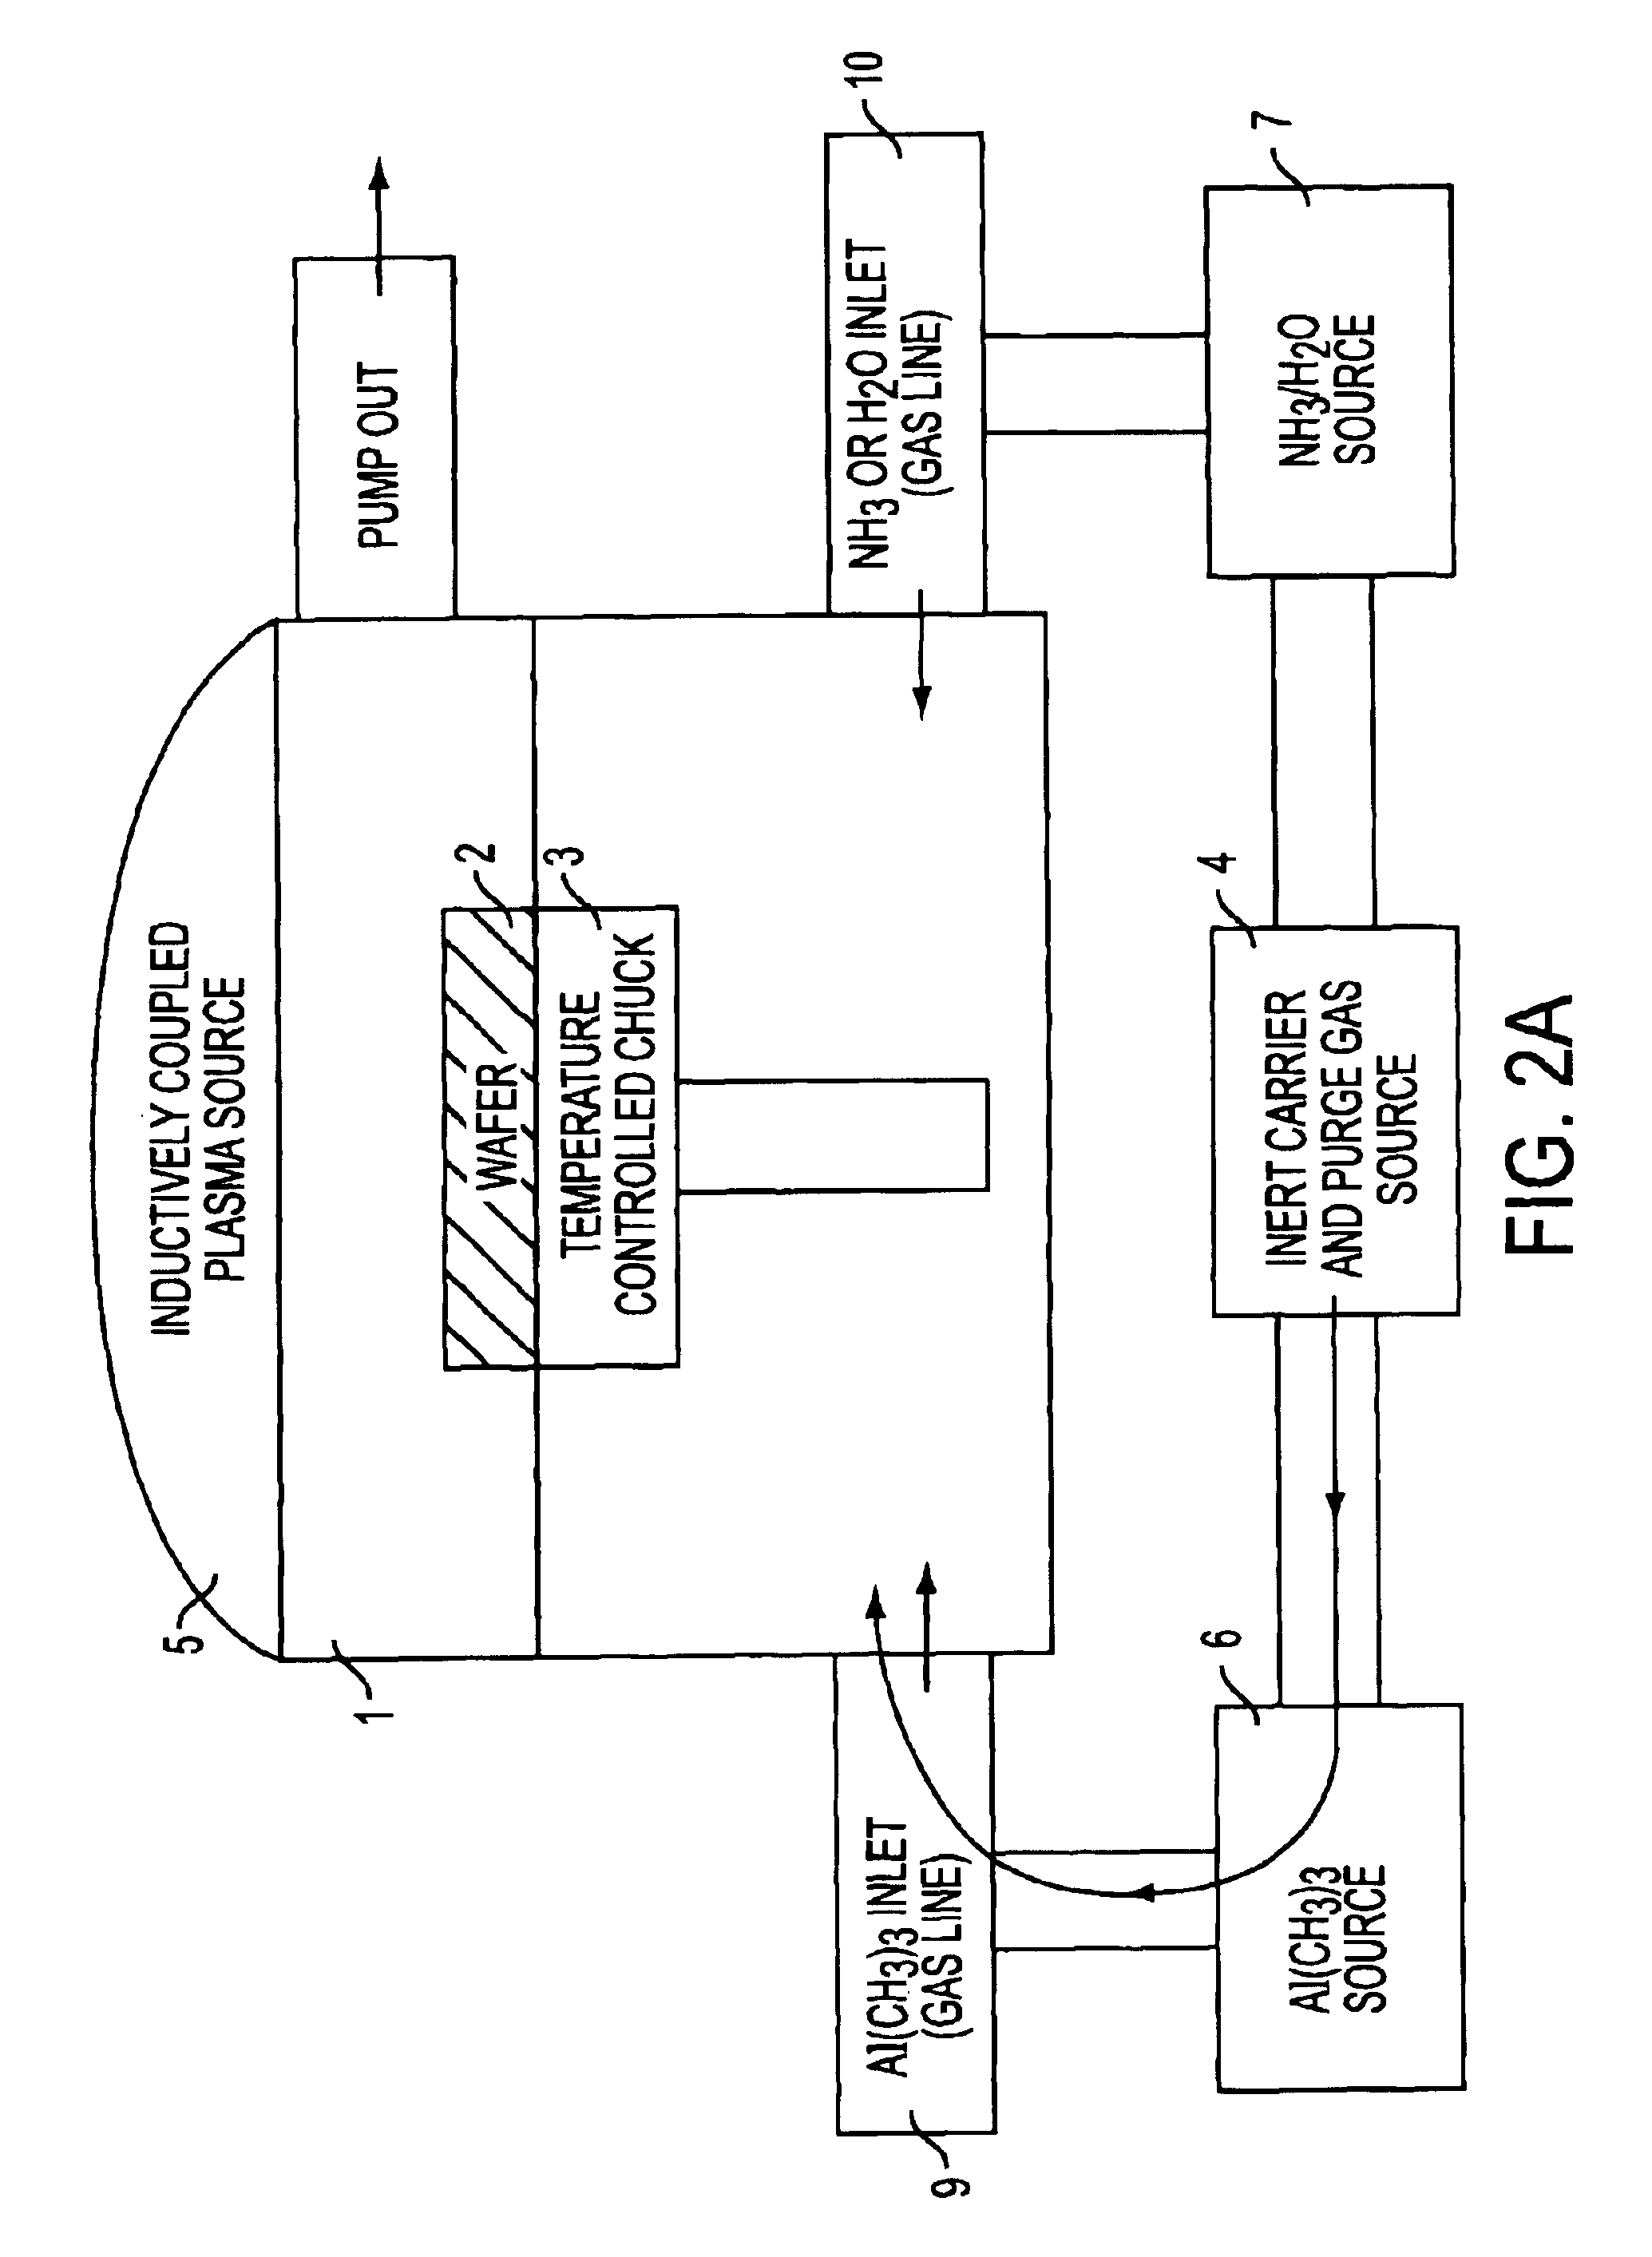 Method of fabricating a multilayer dielectric tunnel barrier structure